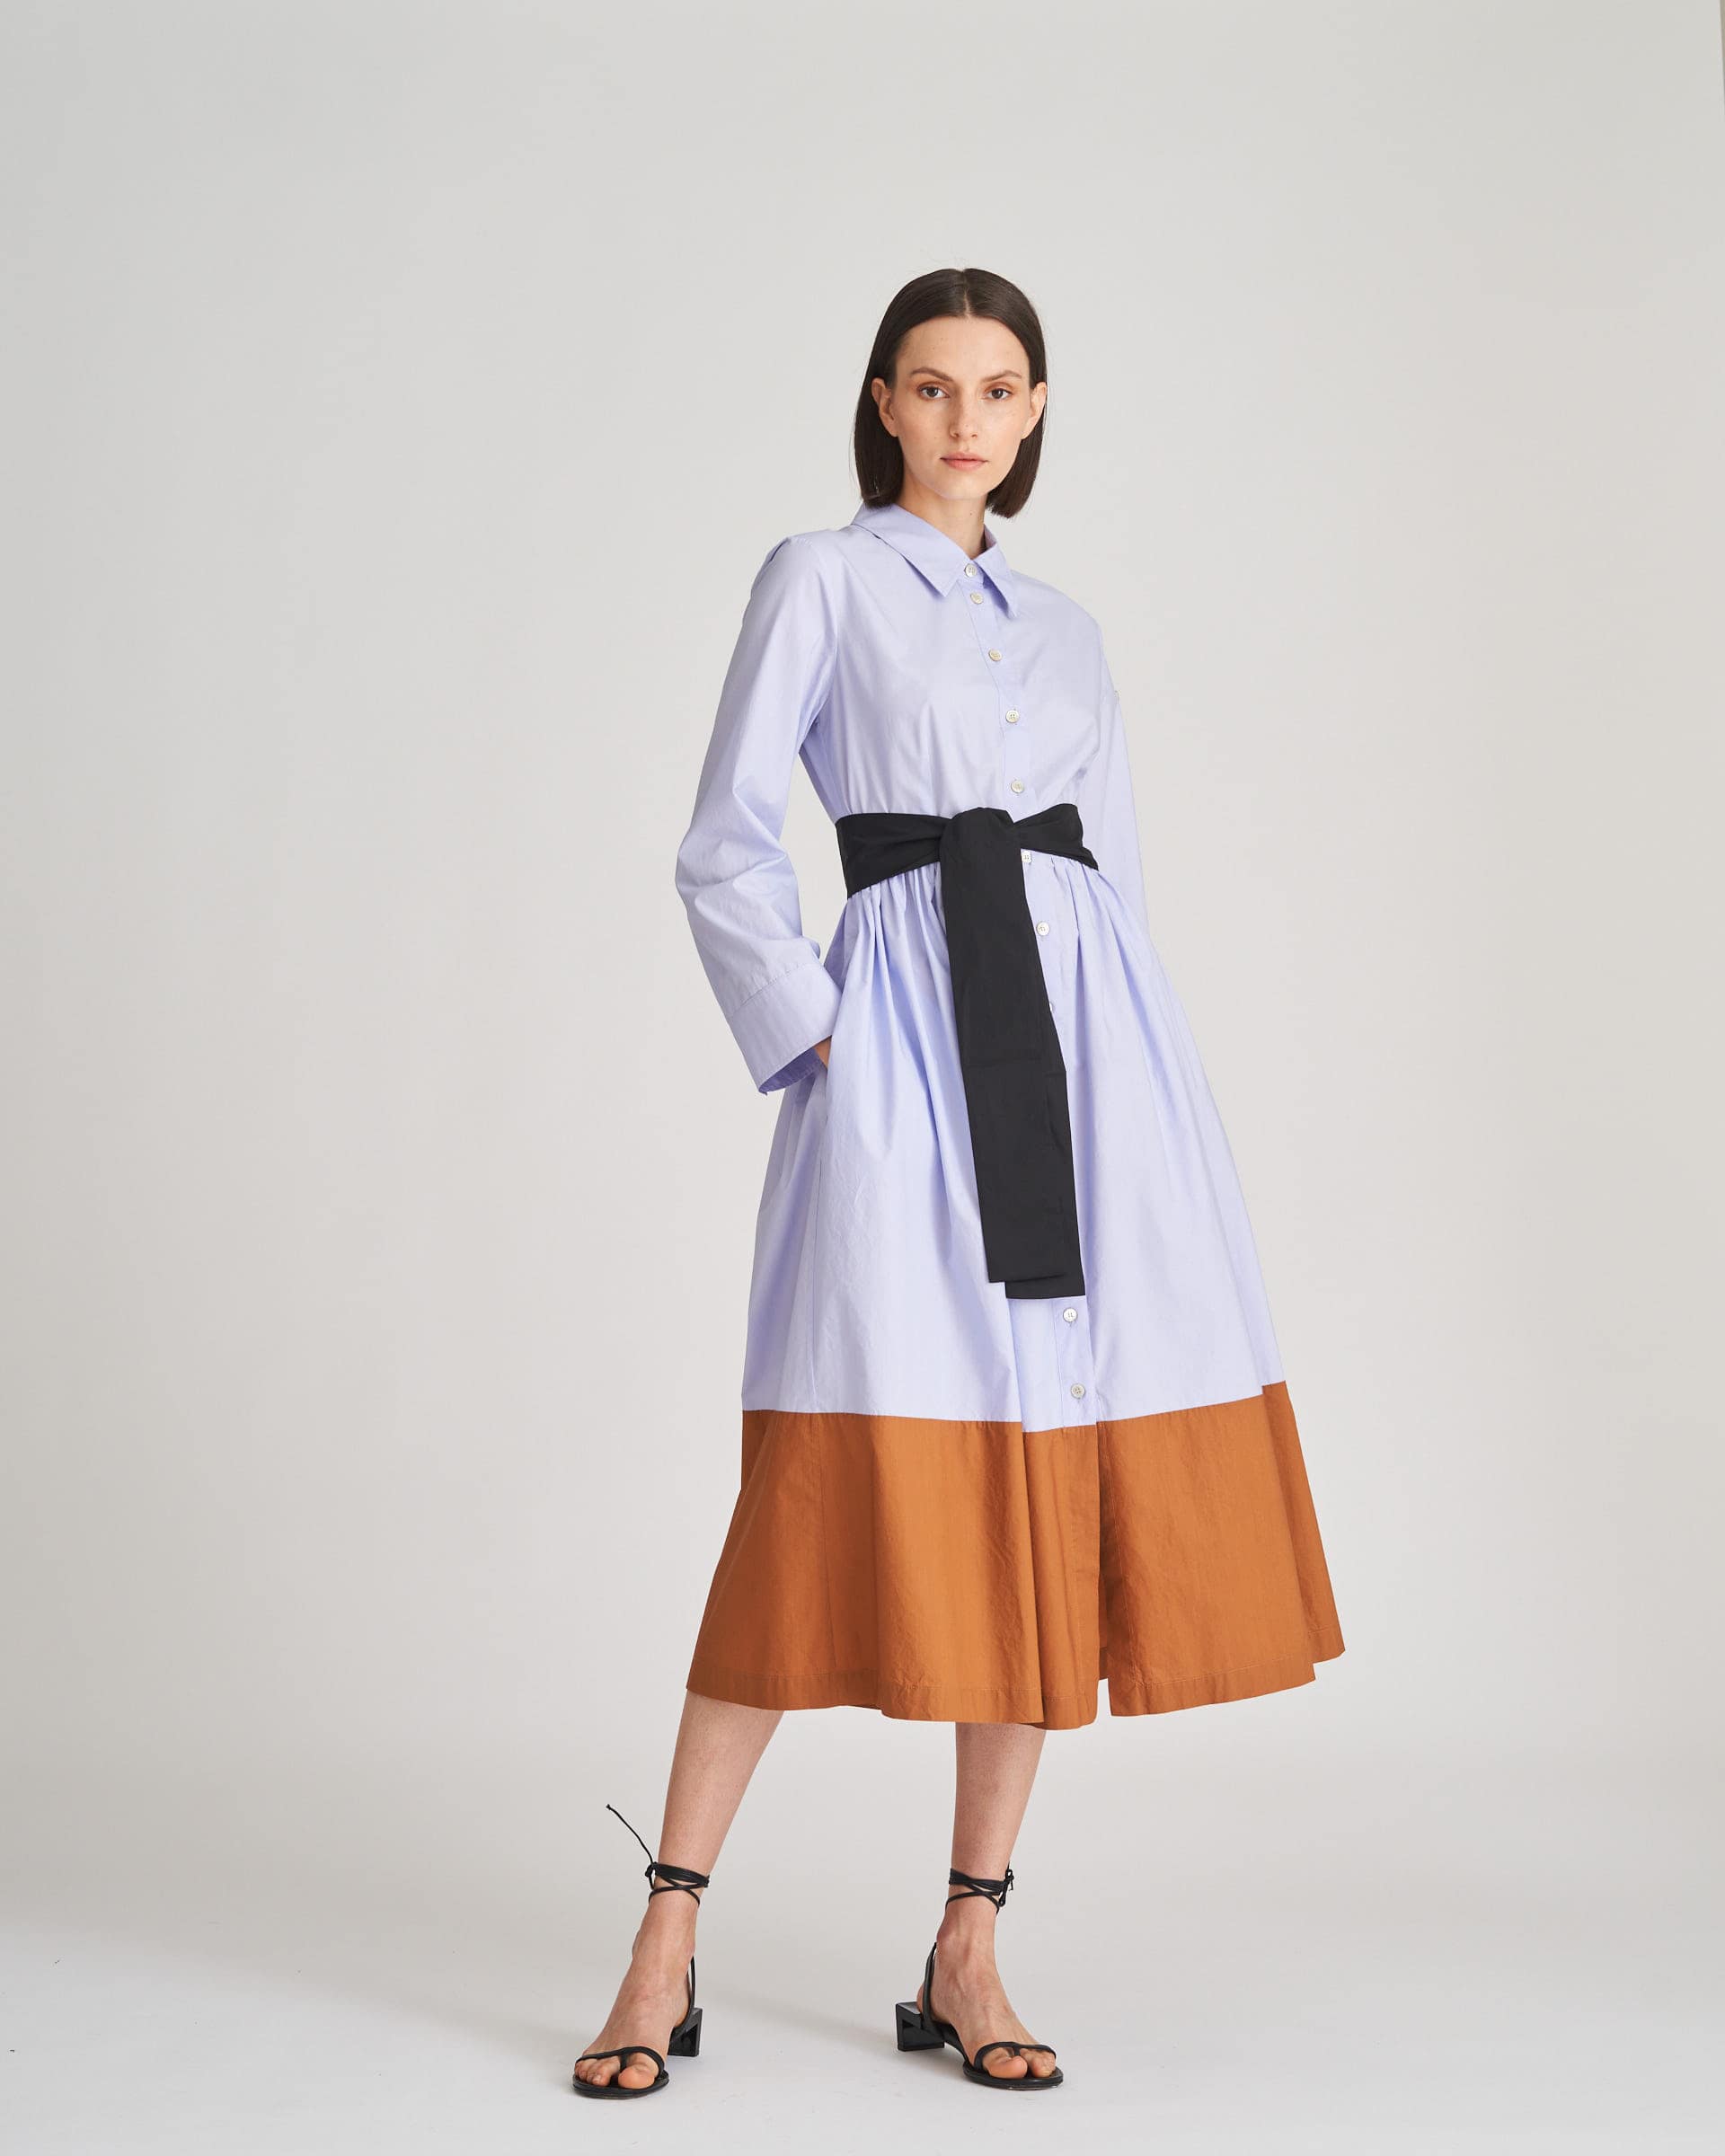 The Market Store | 3 Color Chemisier Dress With Belt